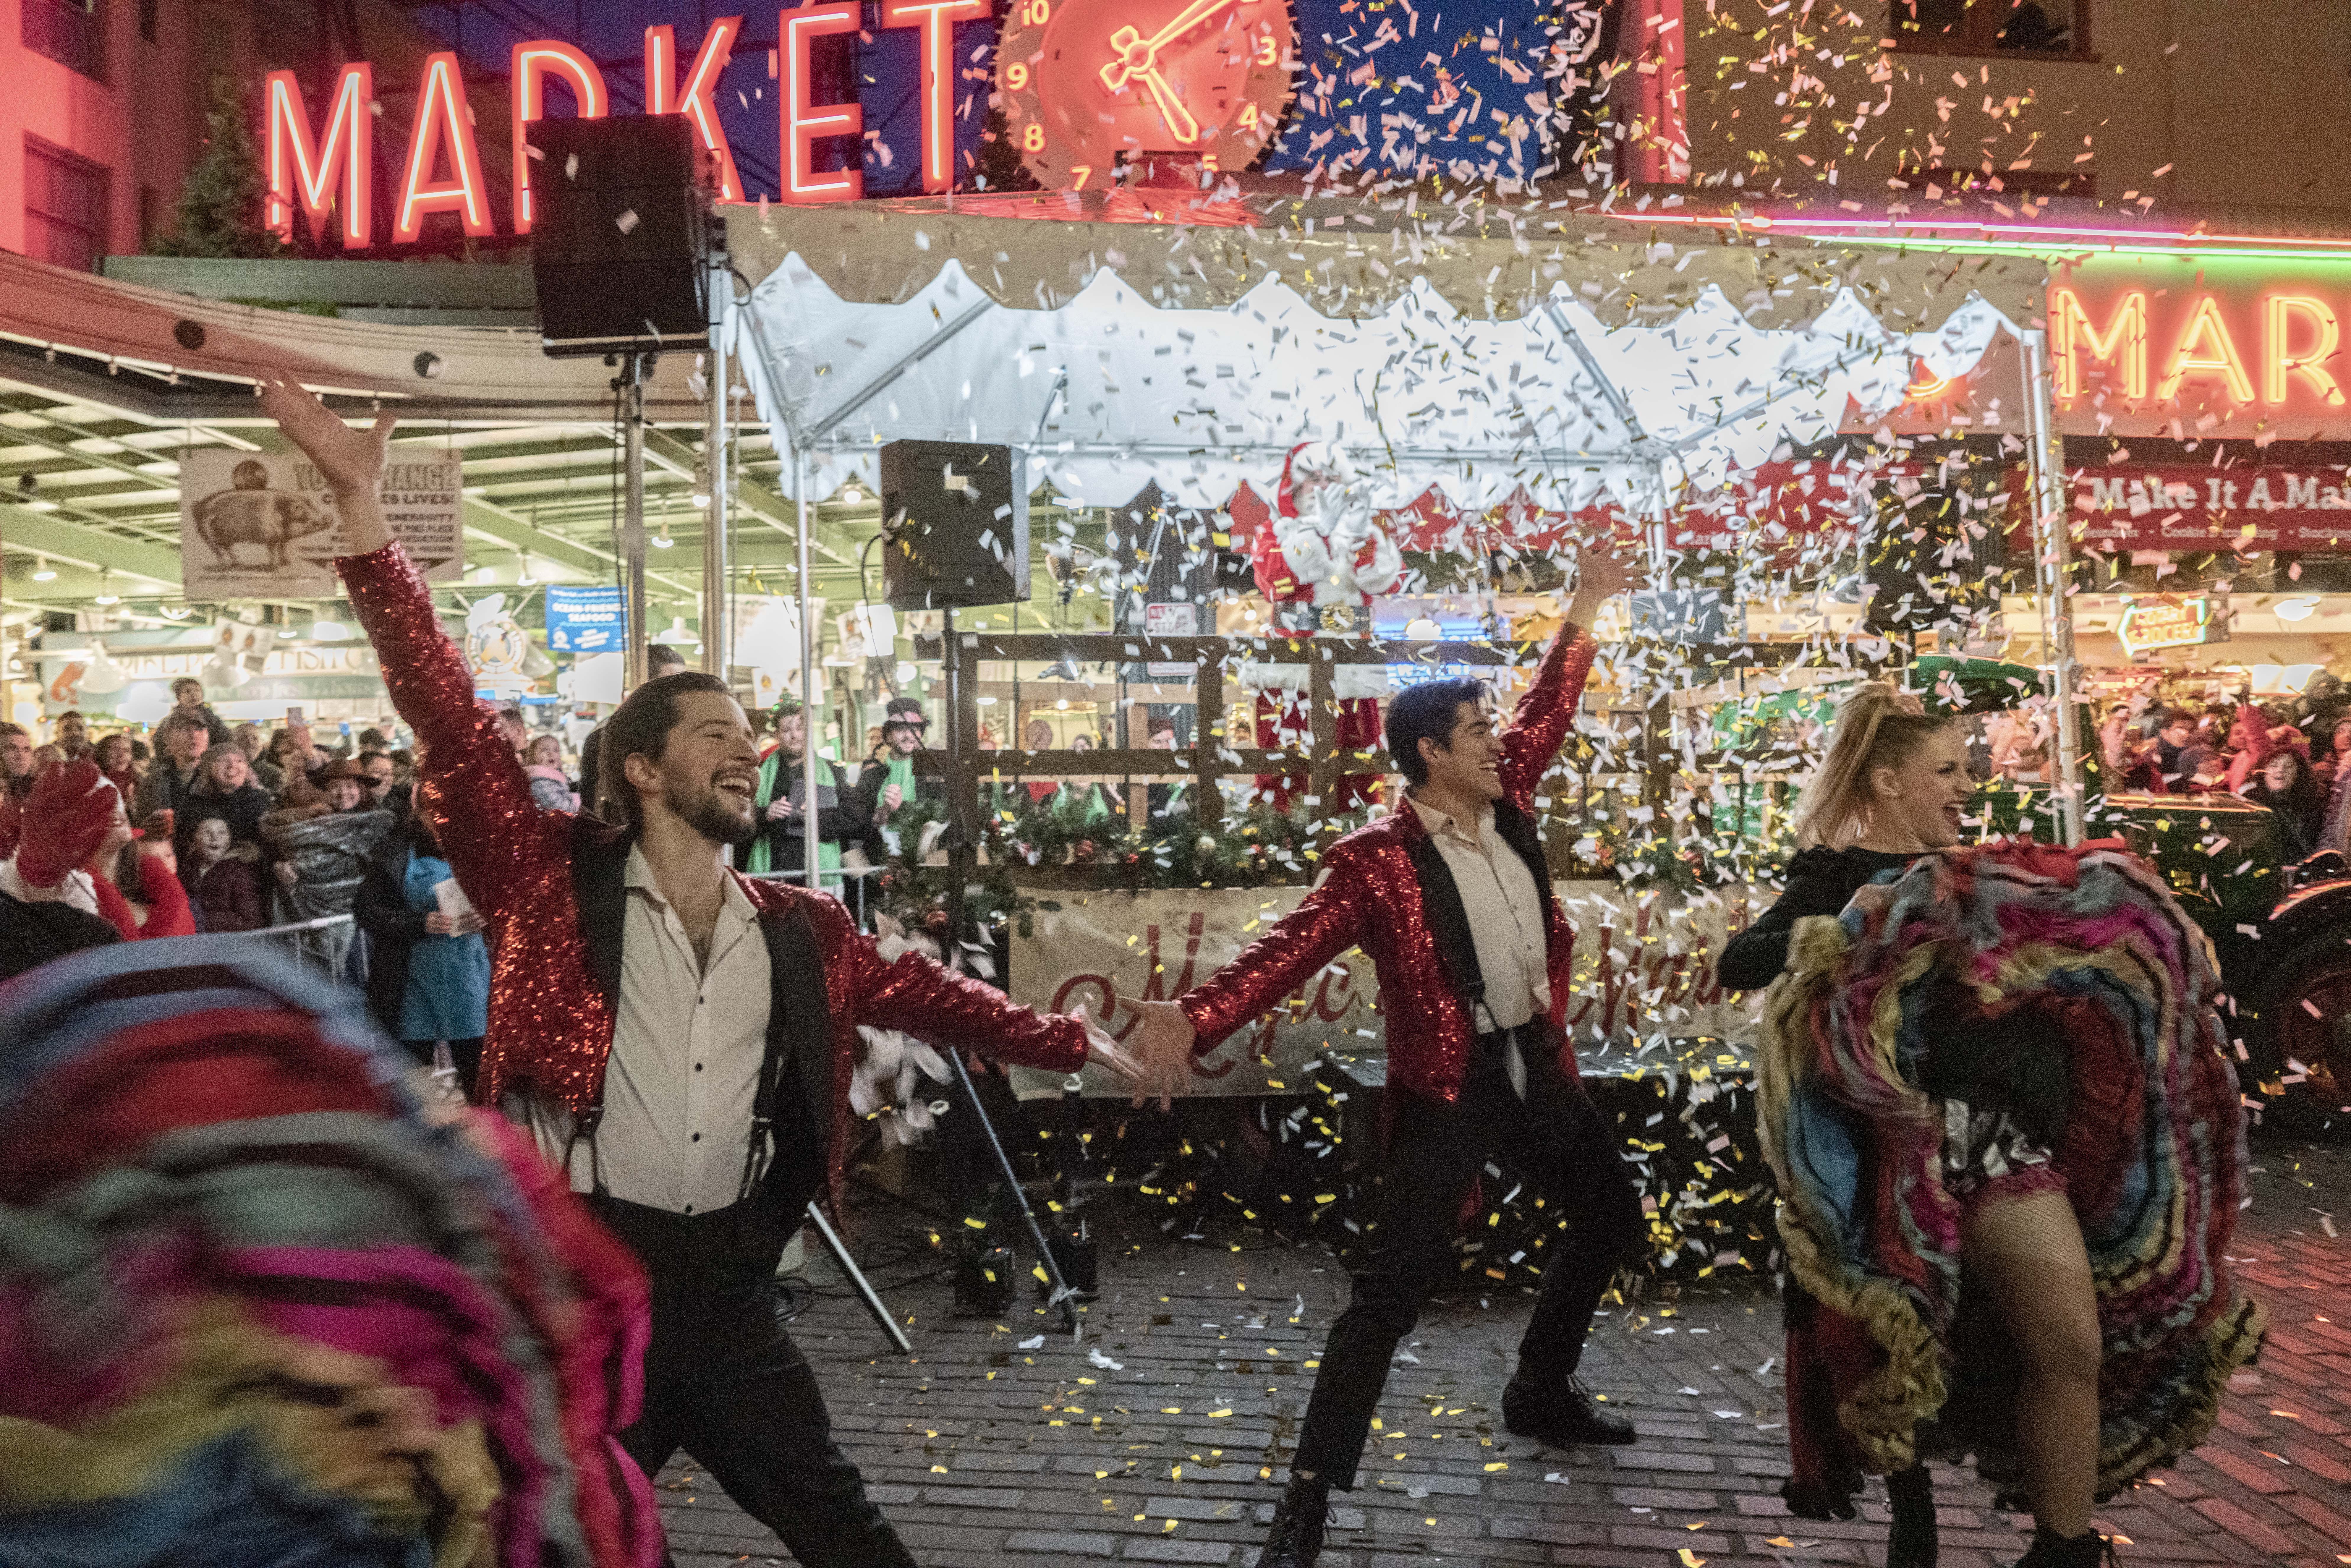 Pike Place Market's Magic at the Market featuring dancers from Can Can Culinary Cabaret